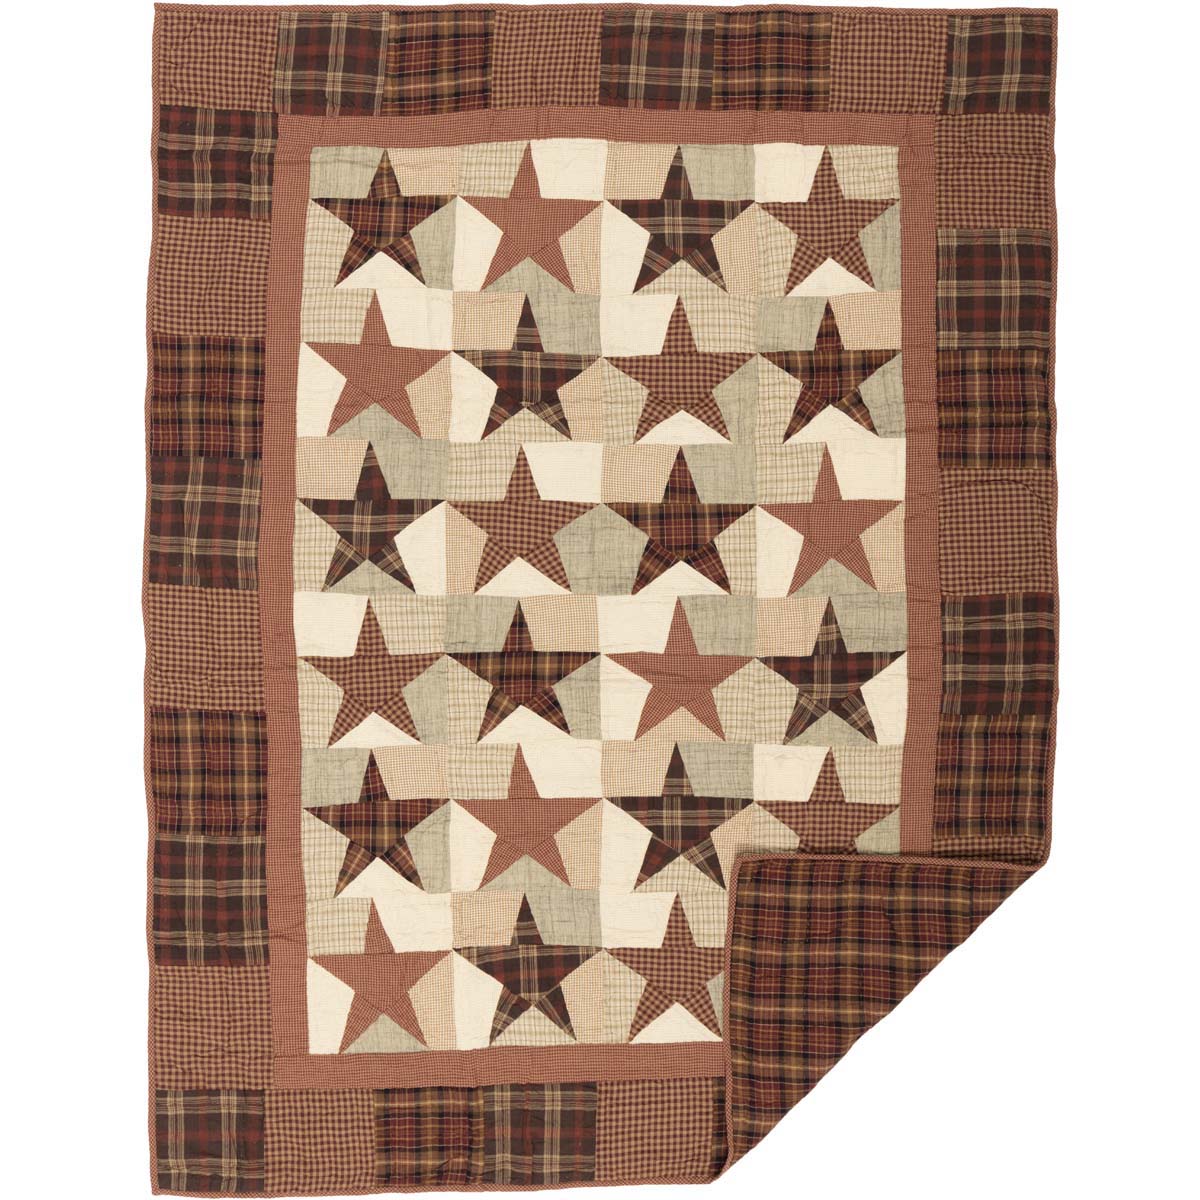 19977-Abilene-Star-Quilted-Throw-70x55-image-4